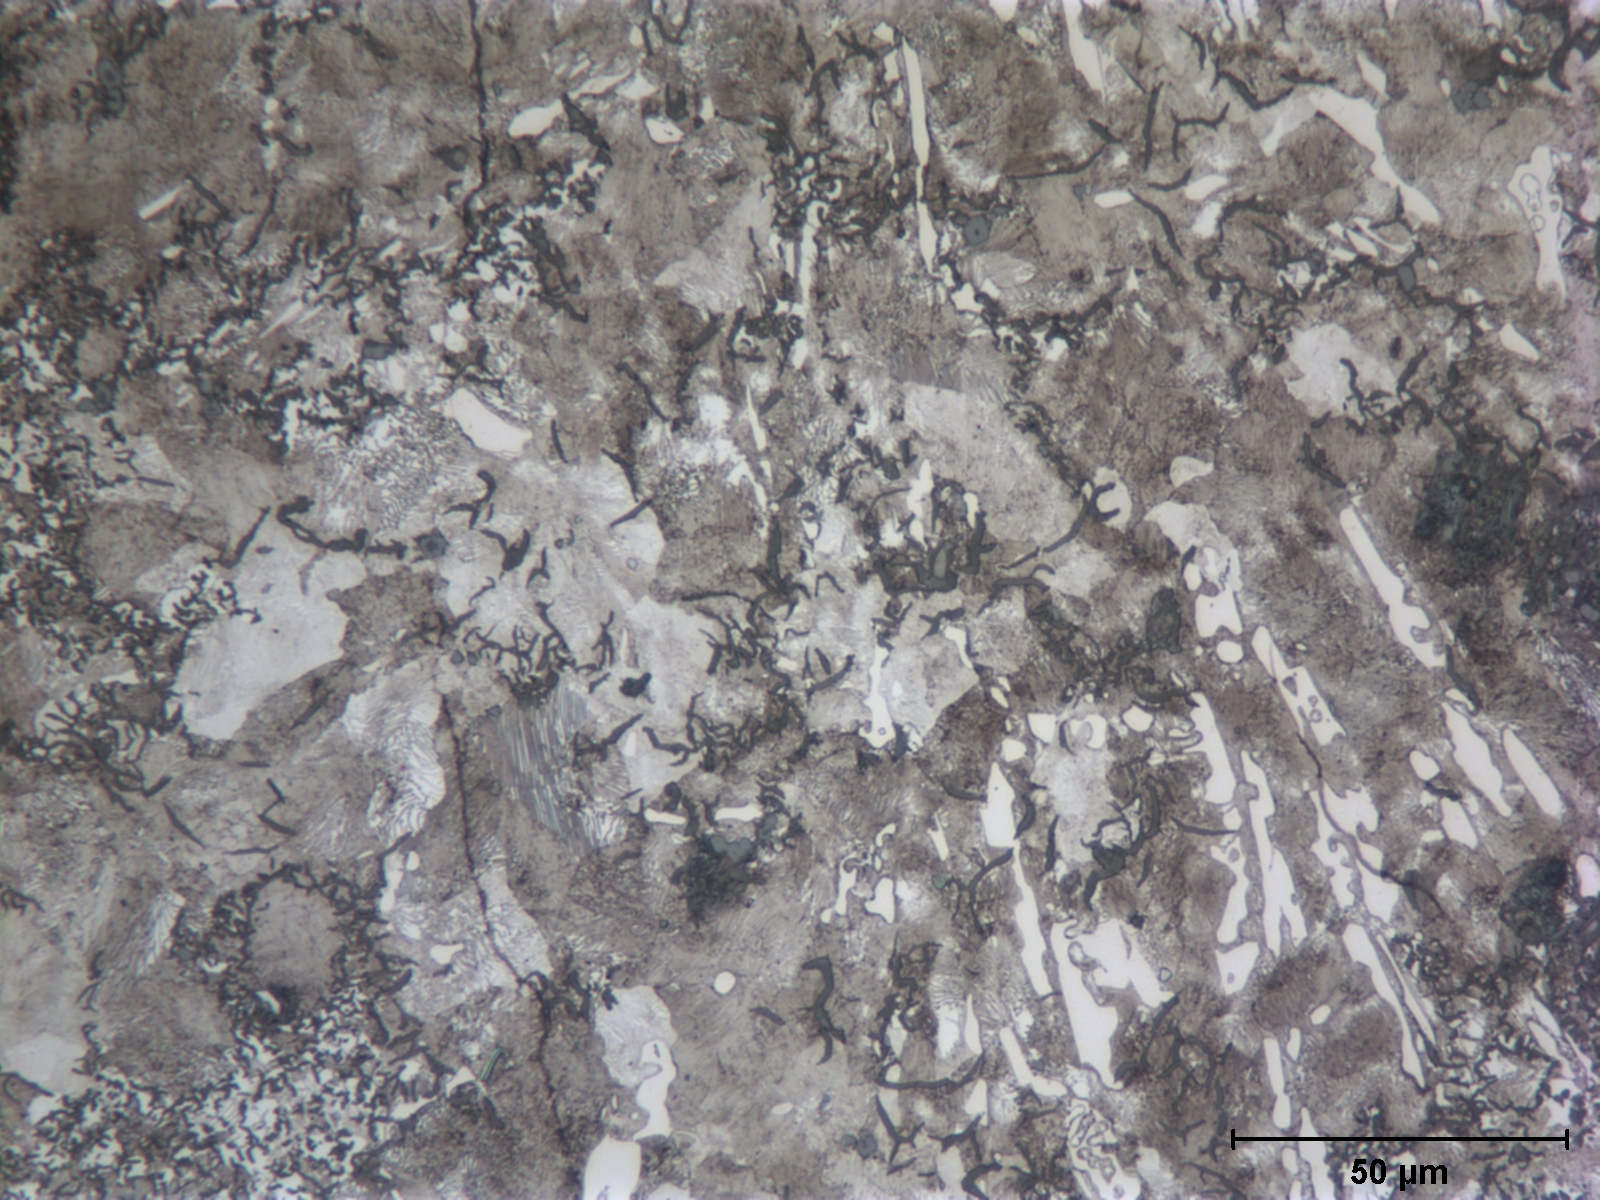 Microstructure of remaining base metal